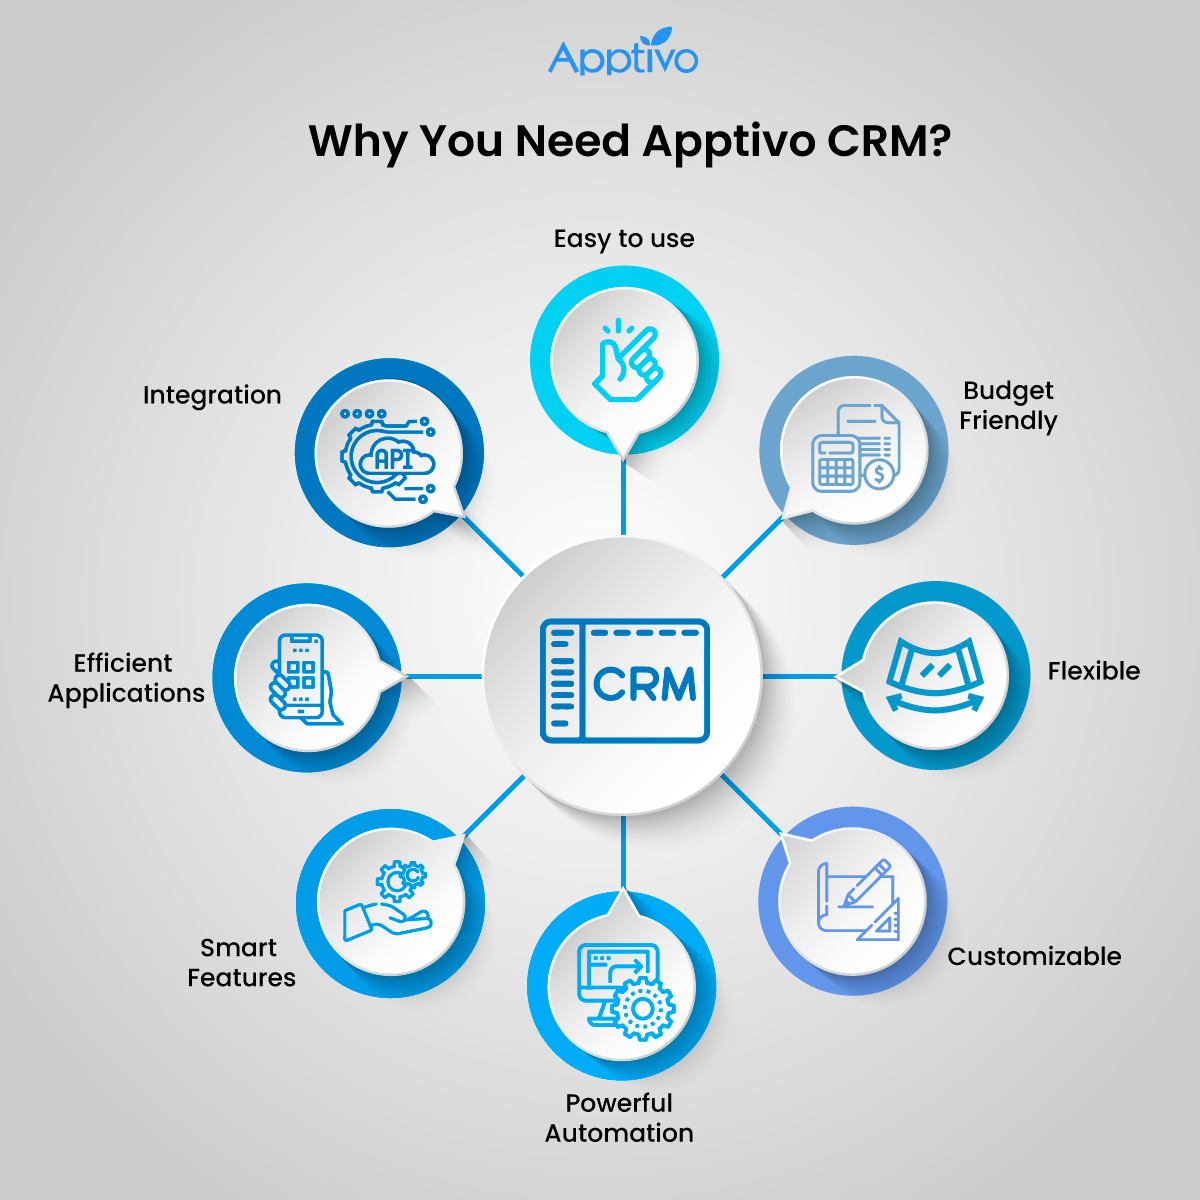 Why do you need CRM